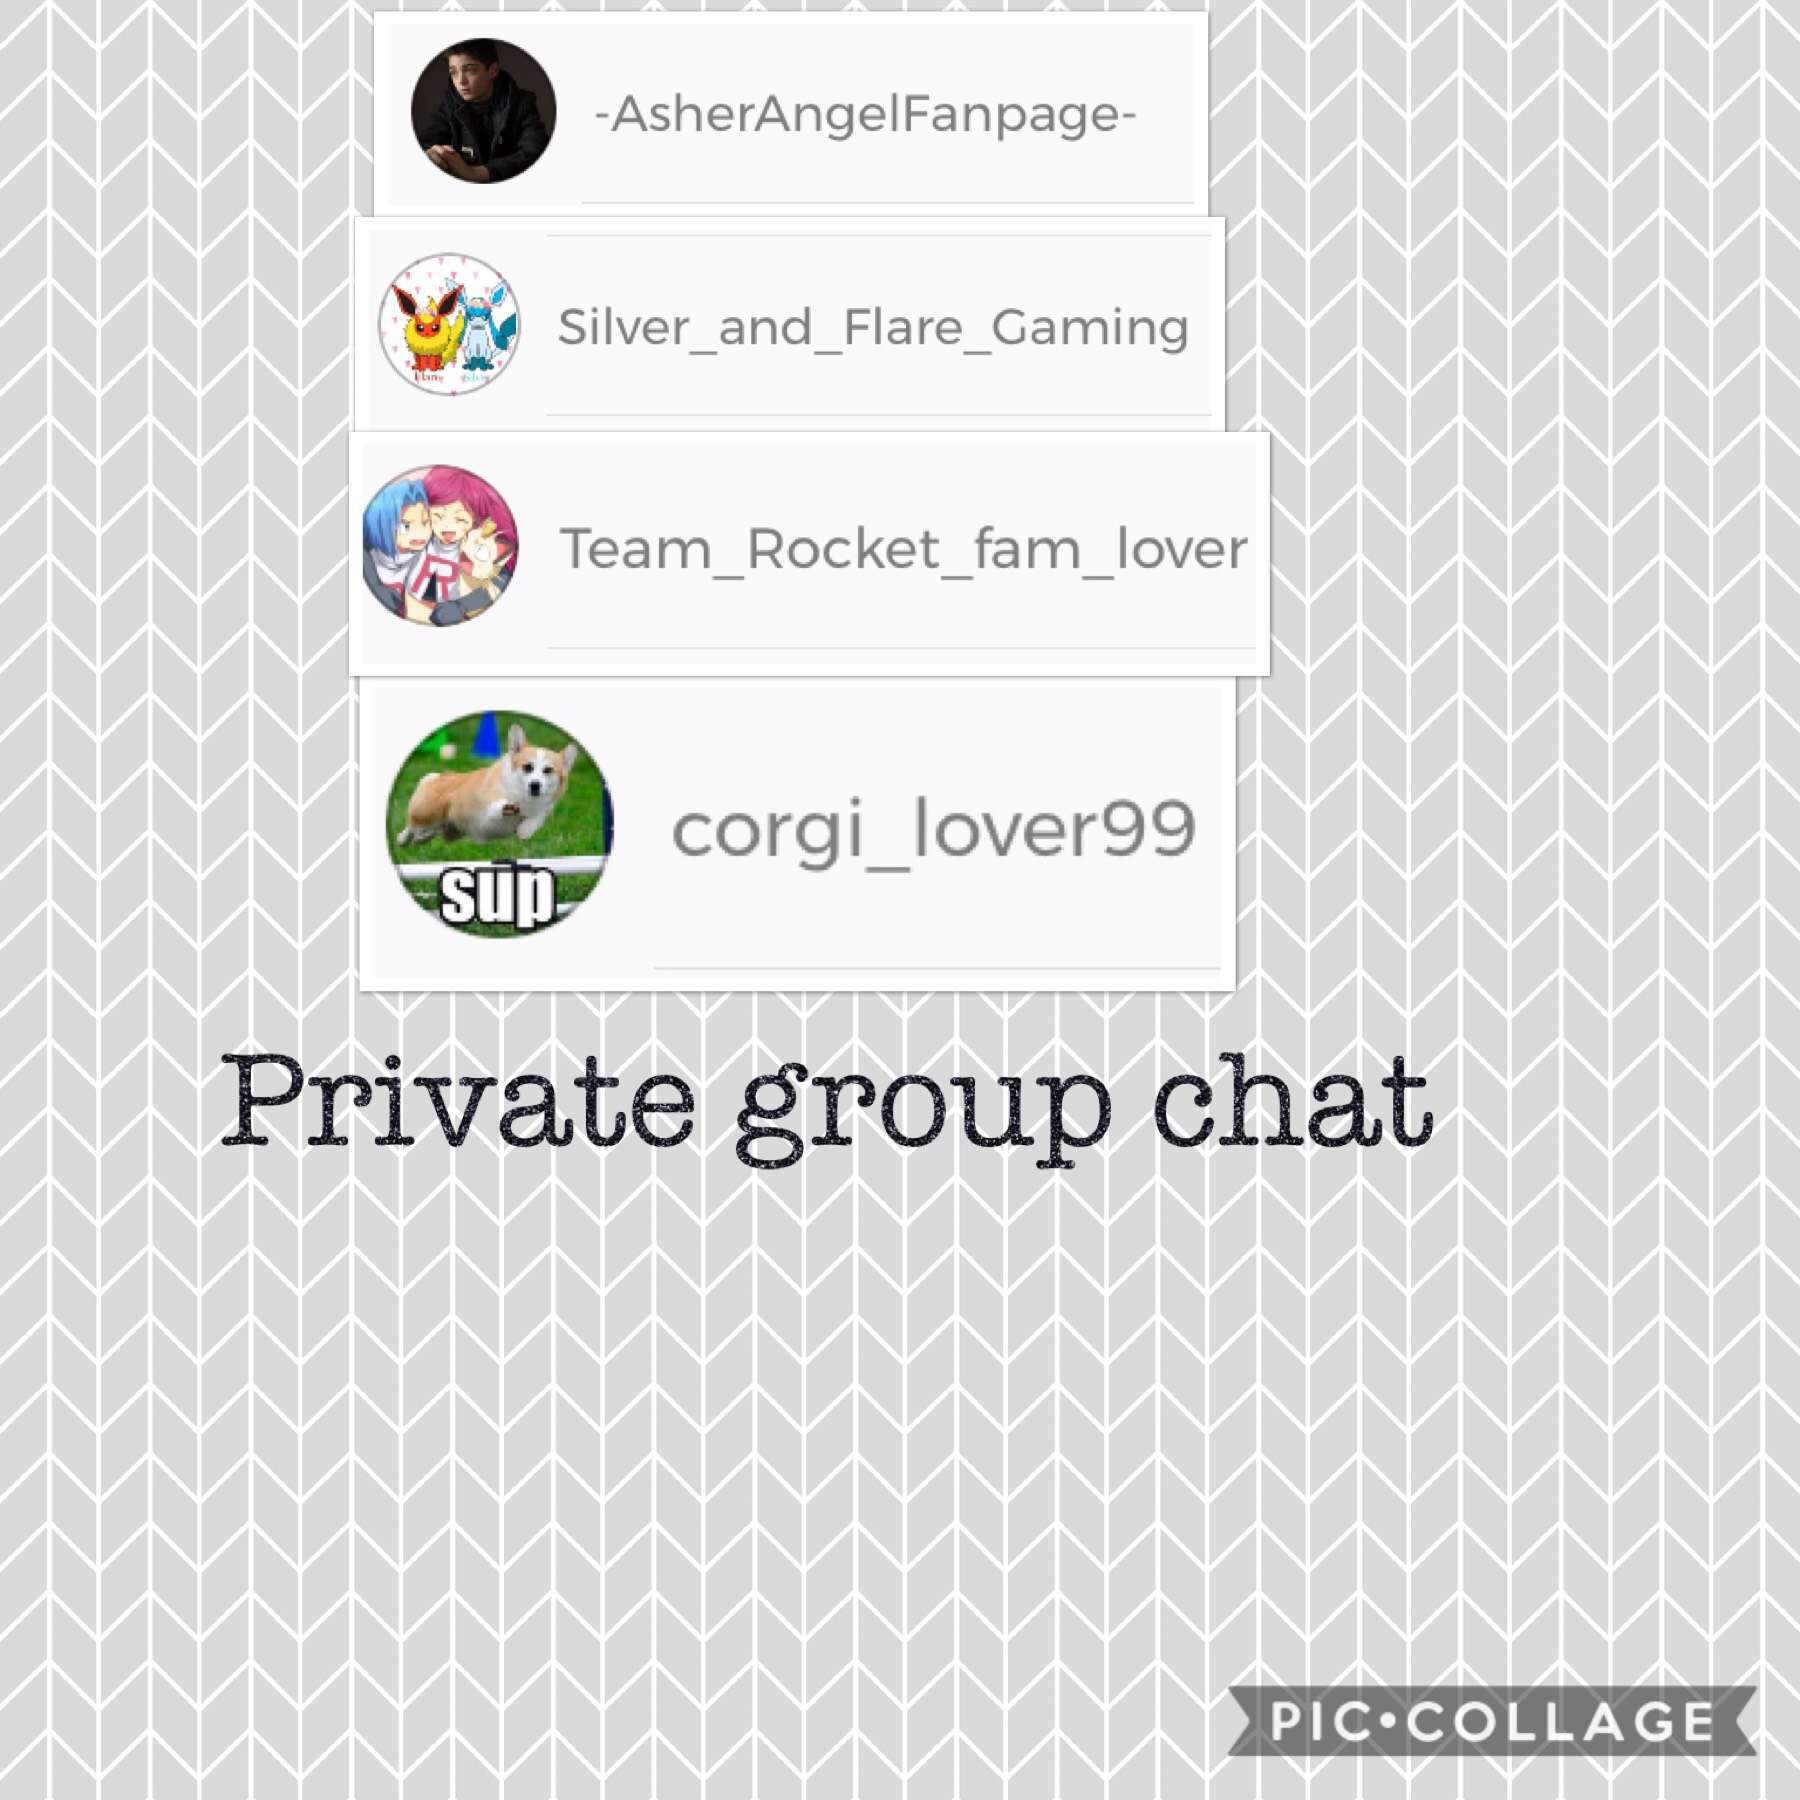 Private group chat. Please don’t snoop if you are not these people